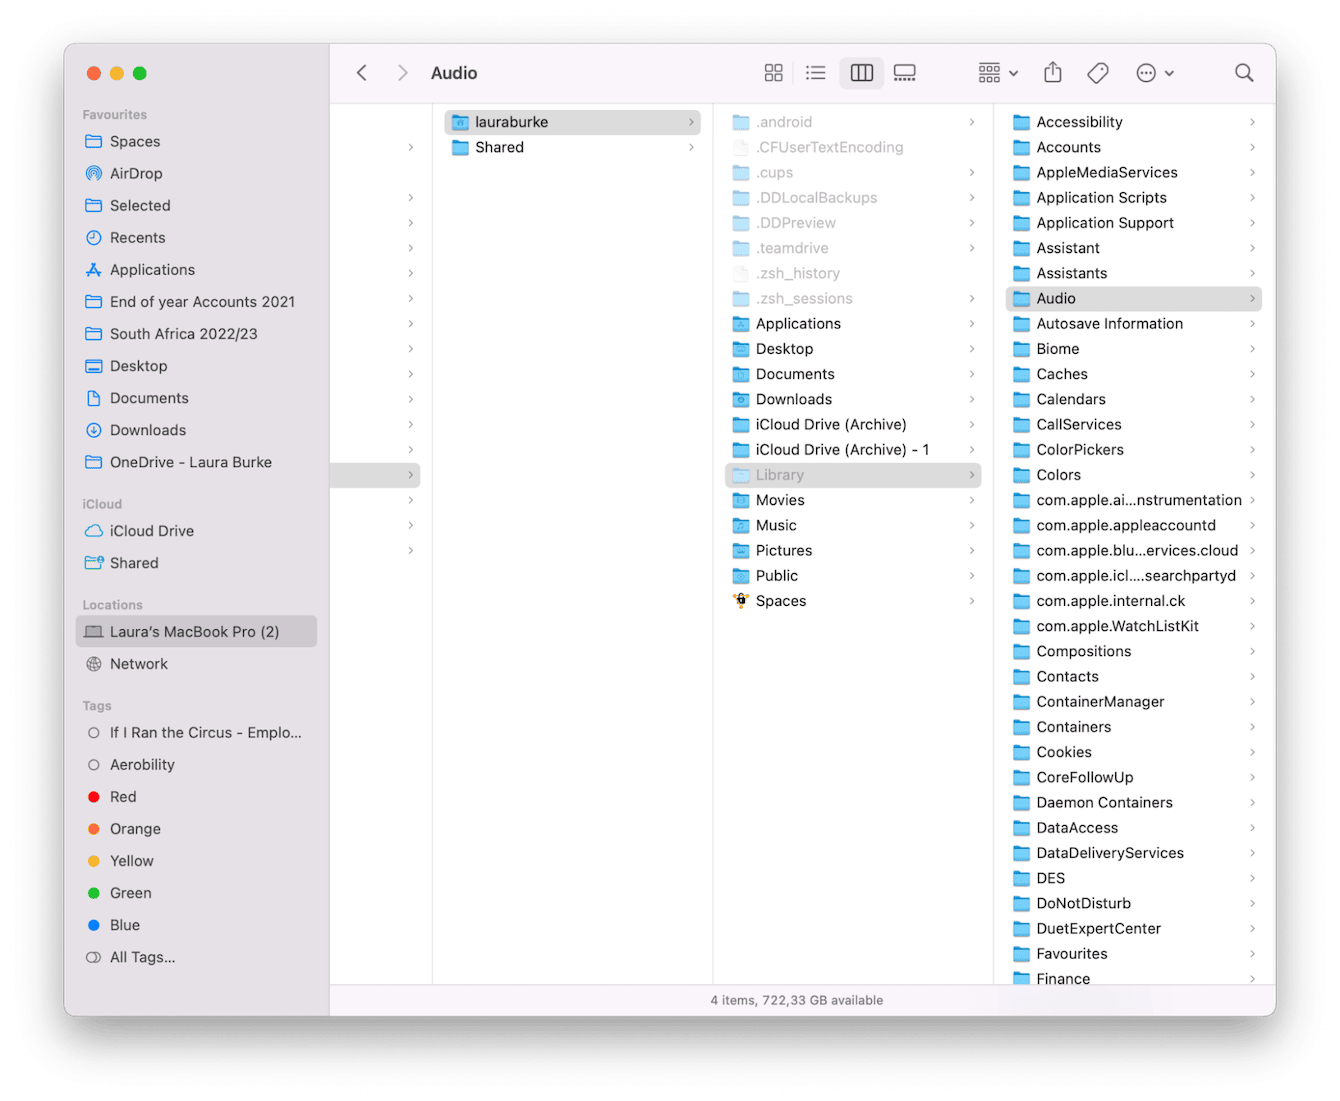 How to view hidden files in macOS with a keyboard shortcut